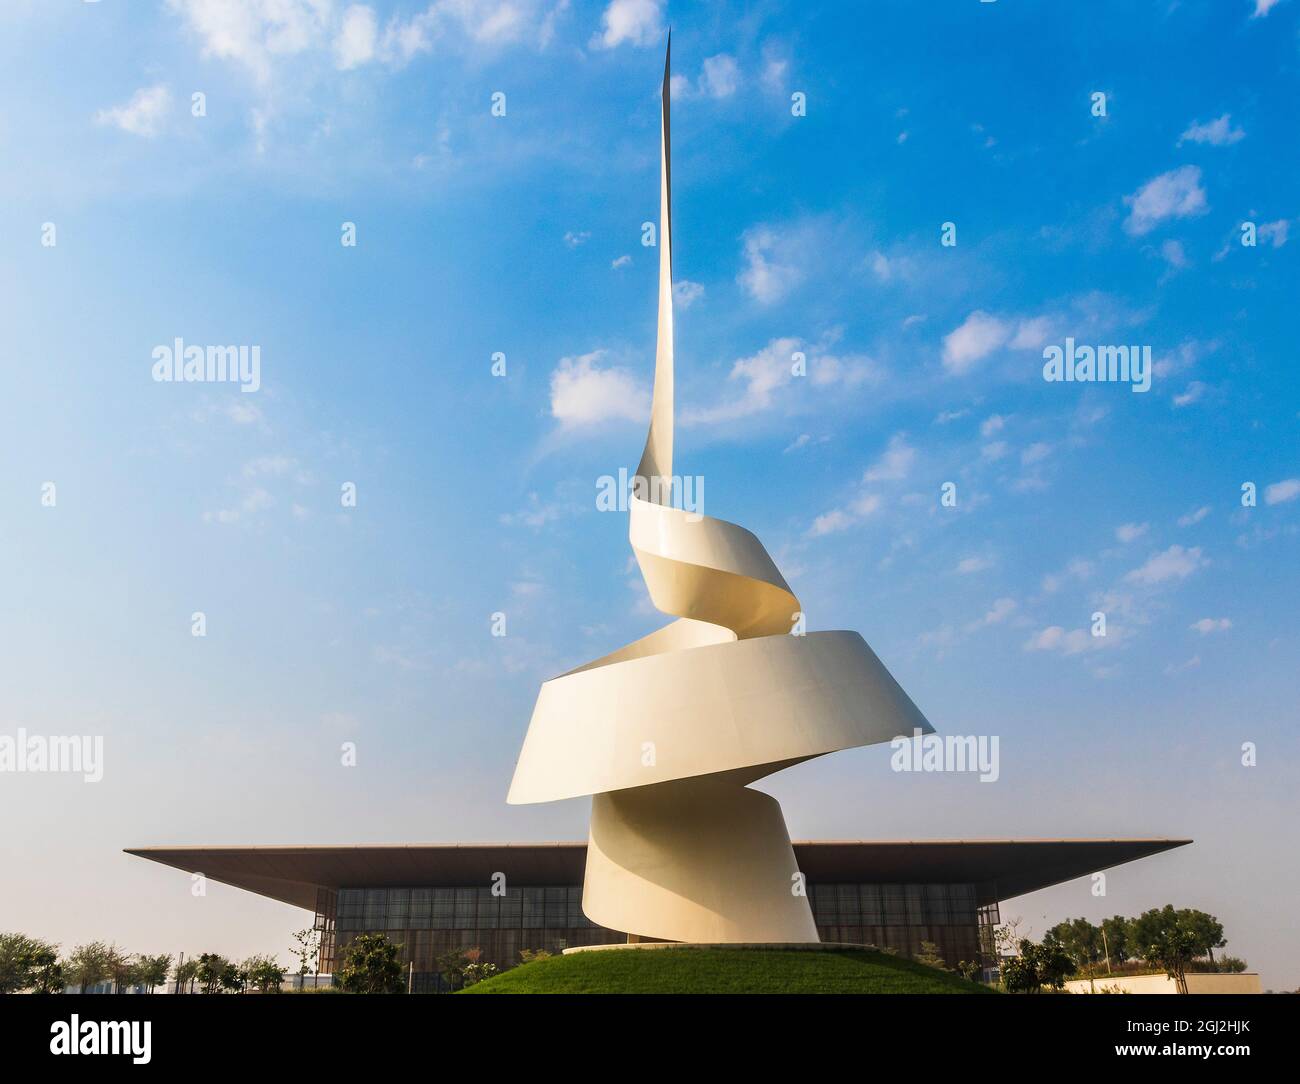 Sharjah, UAE - 09.07.2021 - Monument known as The Scroll that placed close to House of Wisdom library Stock Photo